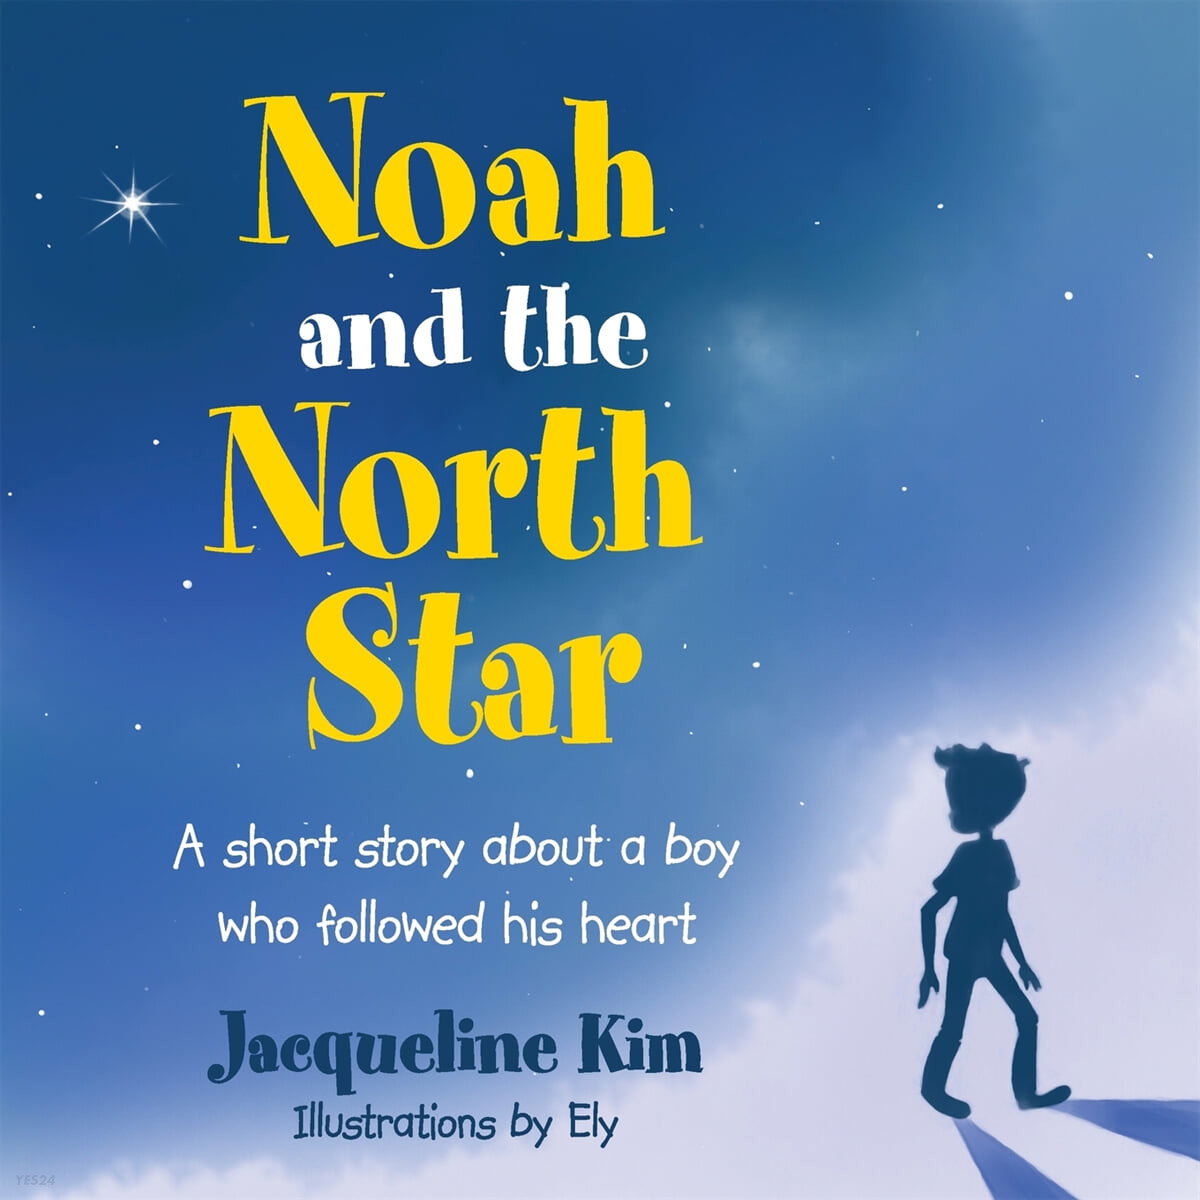 Noah and the North Star (A short story about a boy who followed his heart)